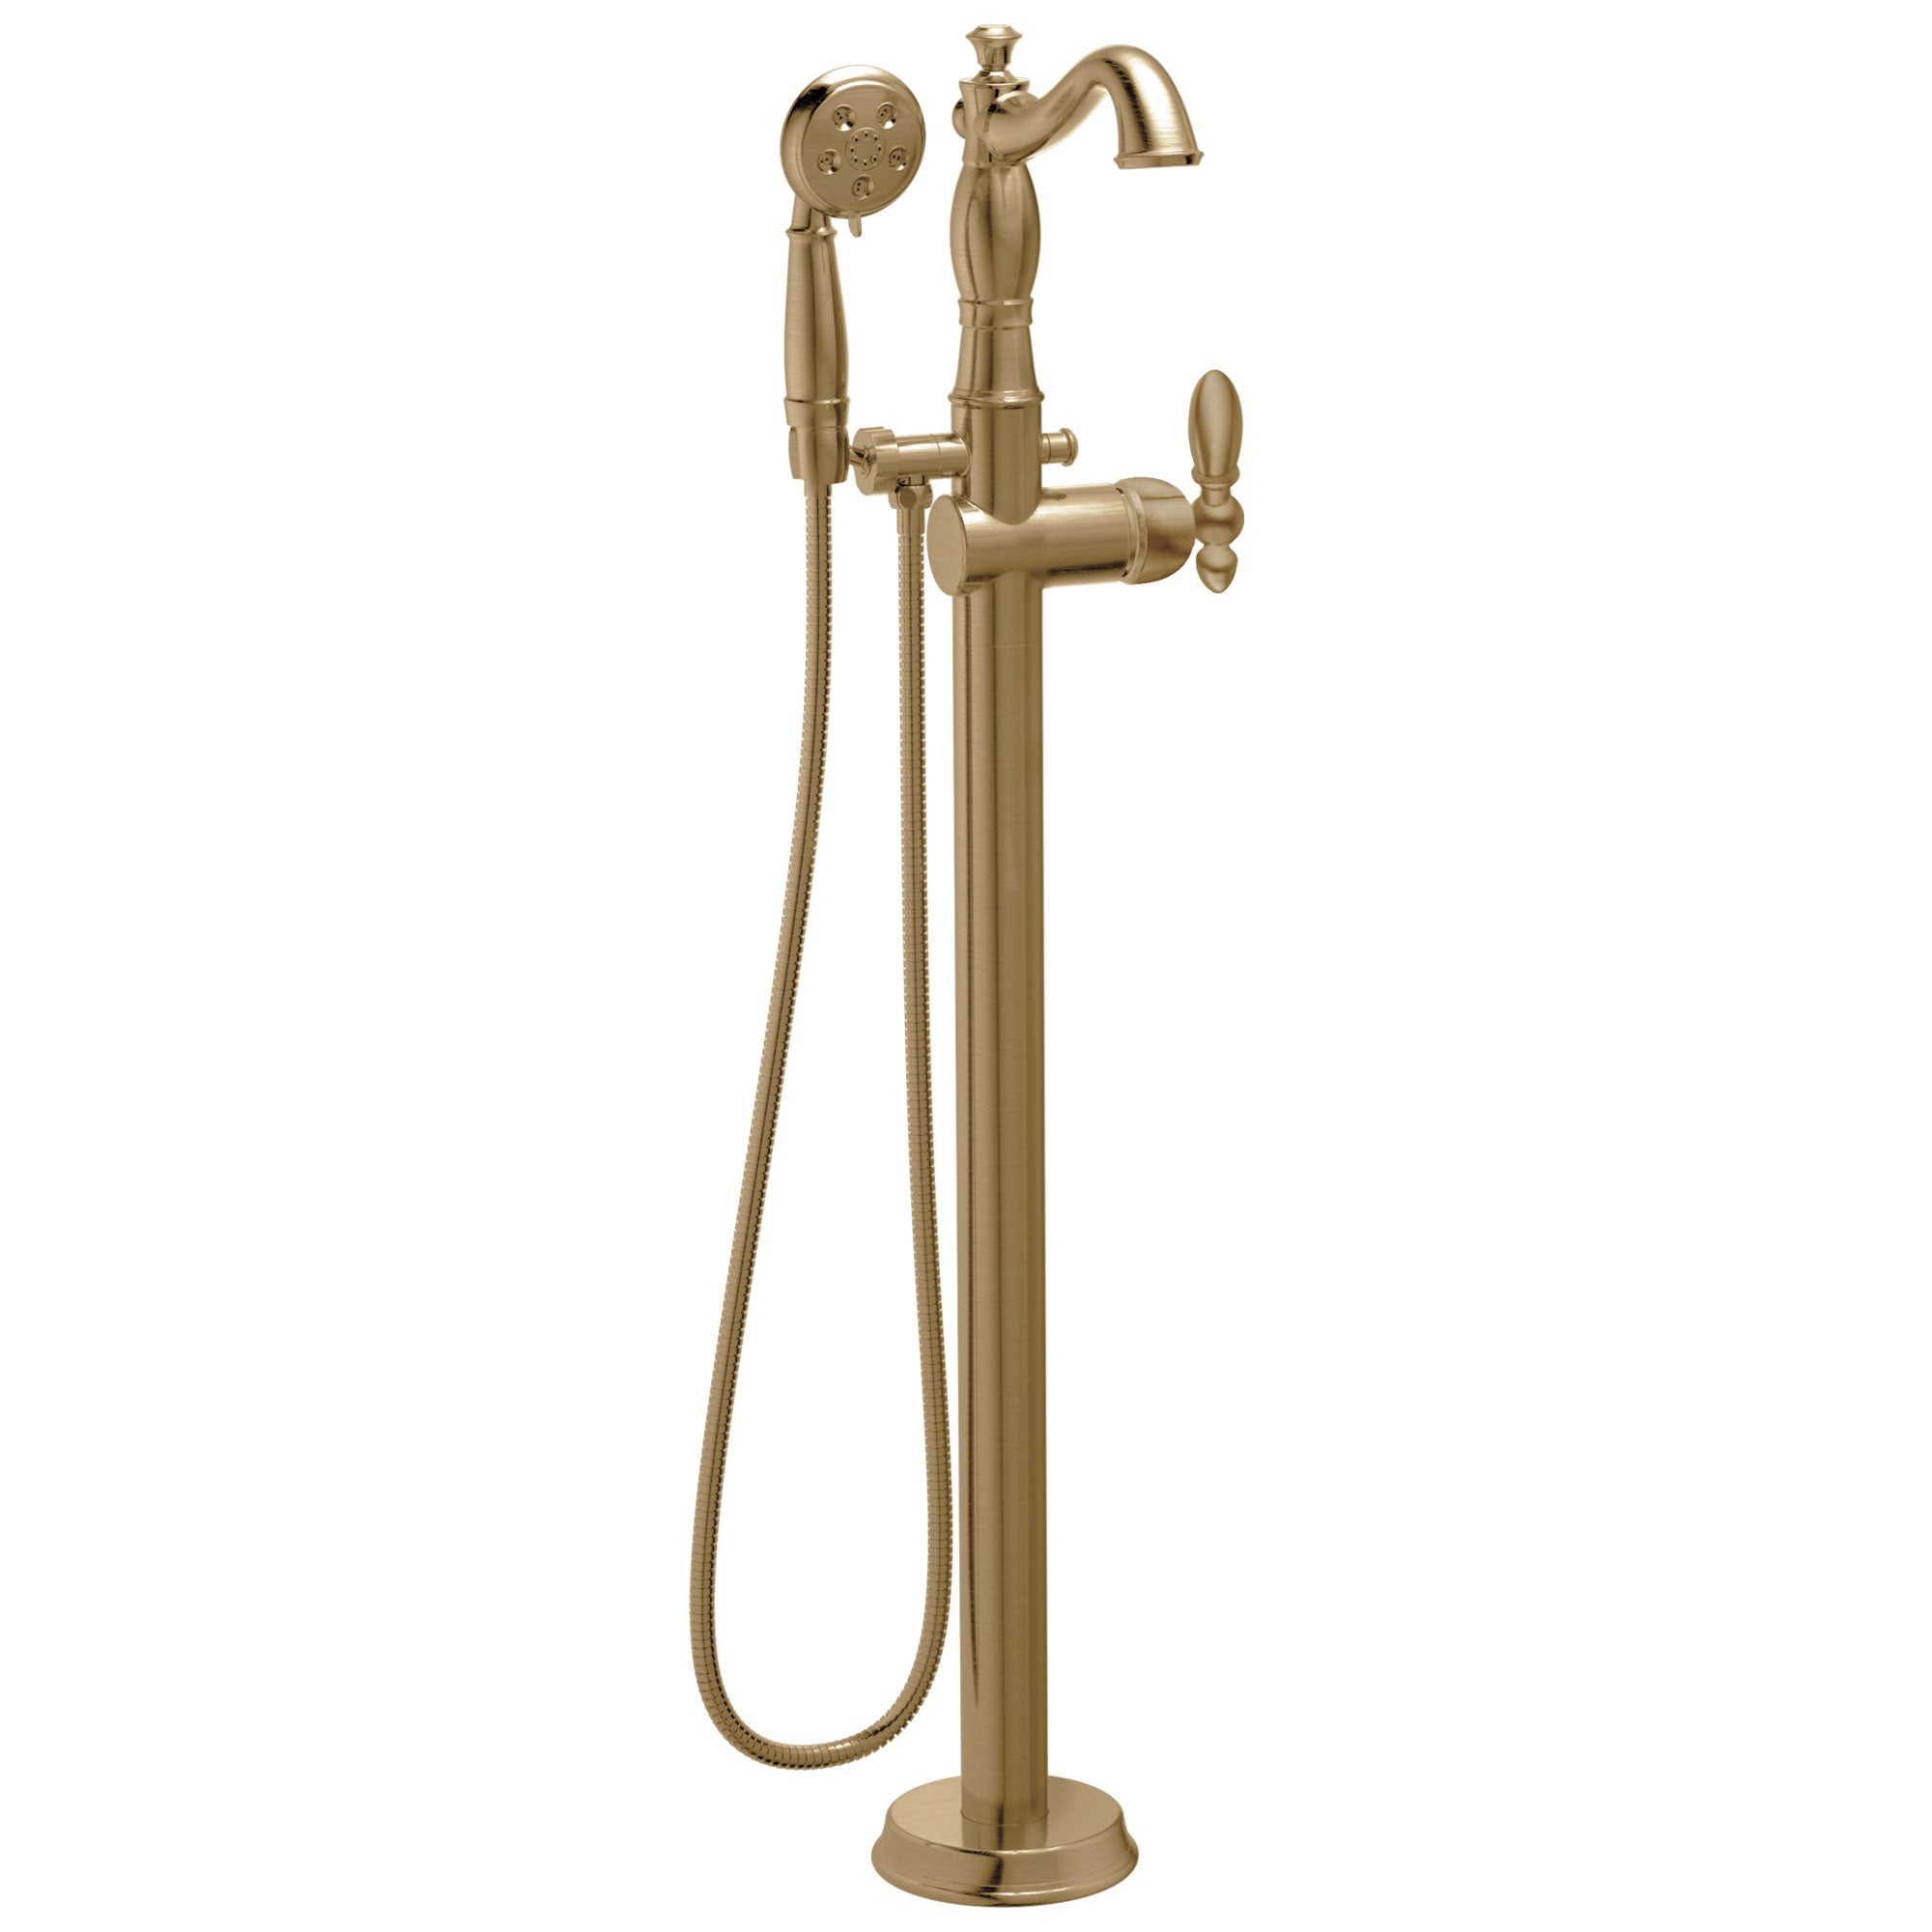 Delta Victorian Freestanding Floor-Mount Tub Filler Faucet with Sprayer in Champagne Bronze INCLUDES Single Lever Handle and Rough-in Valve D2571V